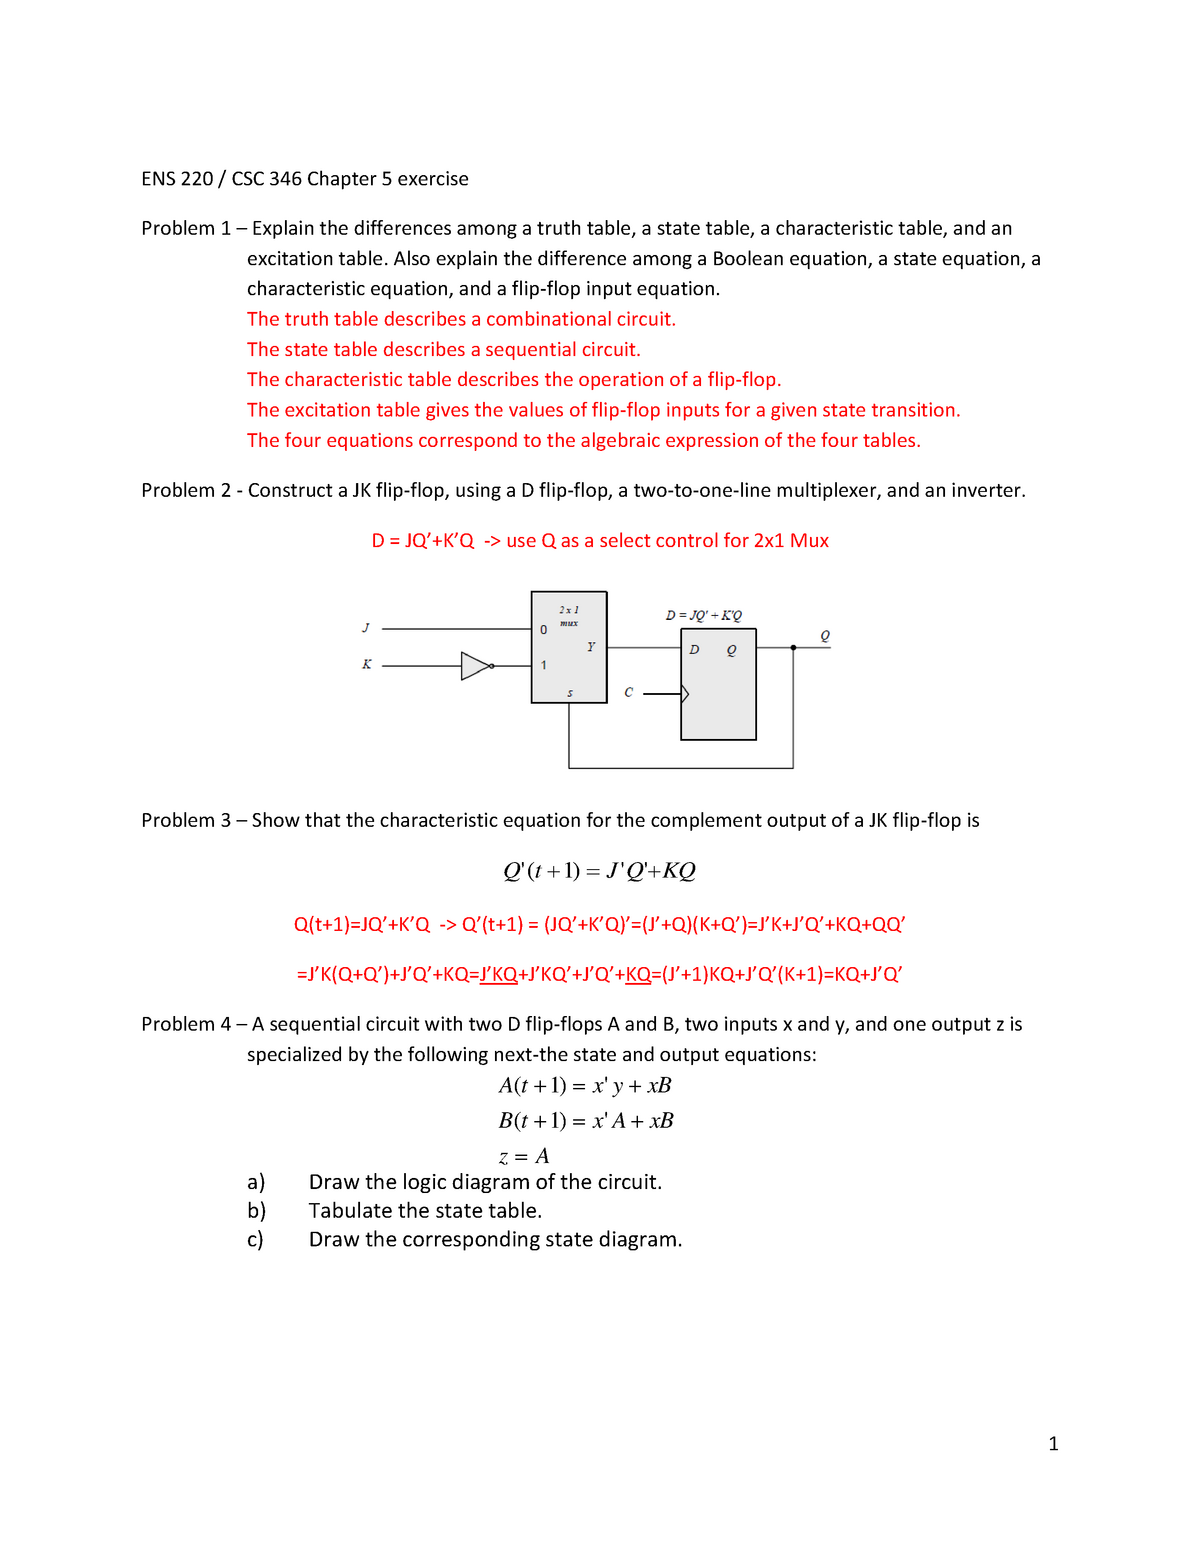 Ch5 Hw Solution V1 N A Ens 221 Ens 2 Csc 346 Chapter Exercise Problem Explain The Differences Among Truth Table State Table Characteristic Table And An Studocu